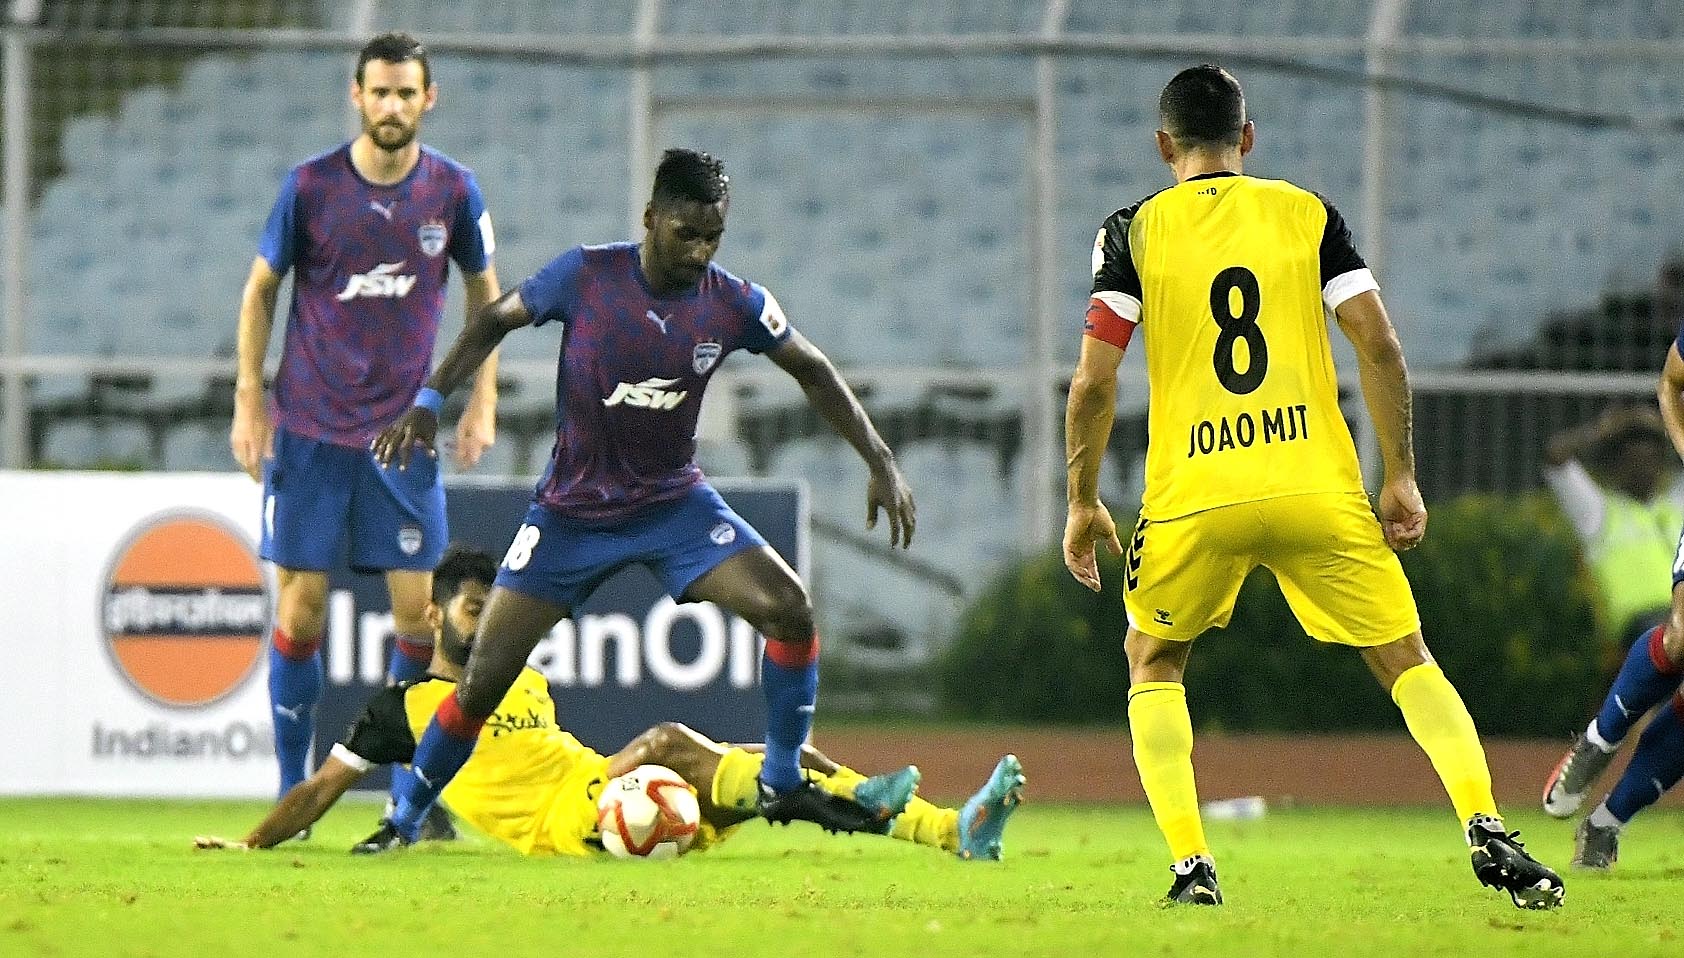 Durand Cup 2022 Highlights: BFC 1-0 HFC, Bengaluru FC seals Final DATE with Mumbai City FC, Odei own goal SINKS Hyderabad FC: Check Highlights